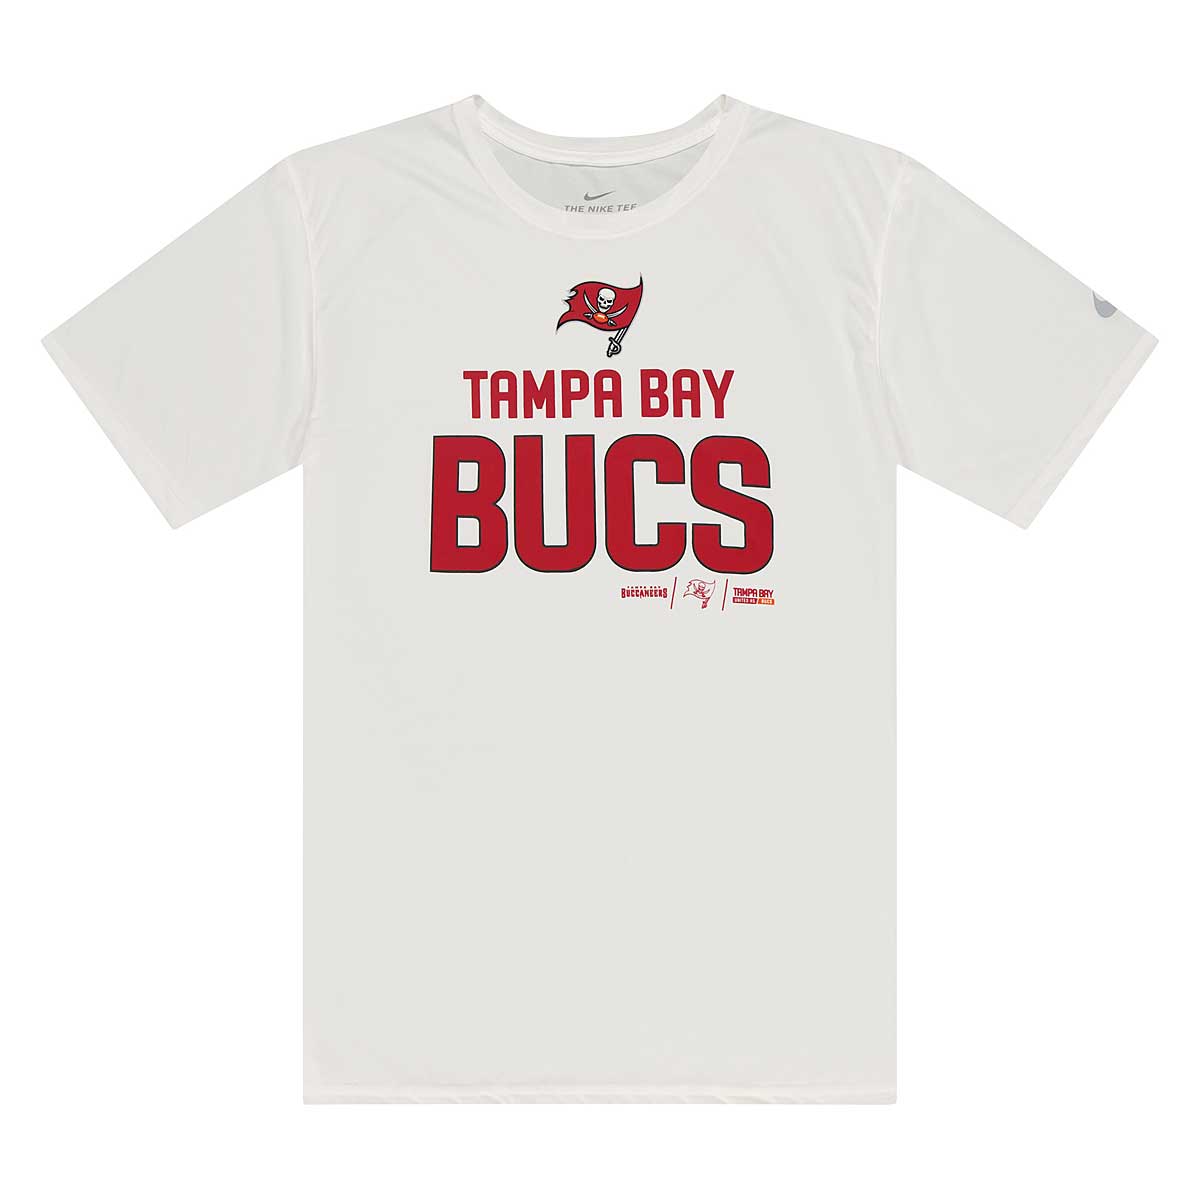 Nike Nfl Tampa Bay Buccaneers Legend Community T-Shirt, White 10A Tampa Bay Buccaneers